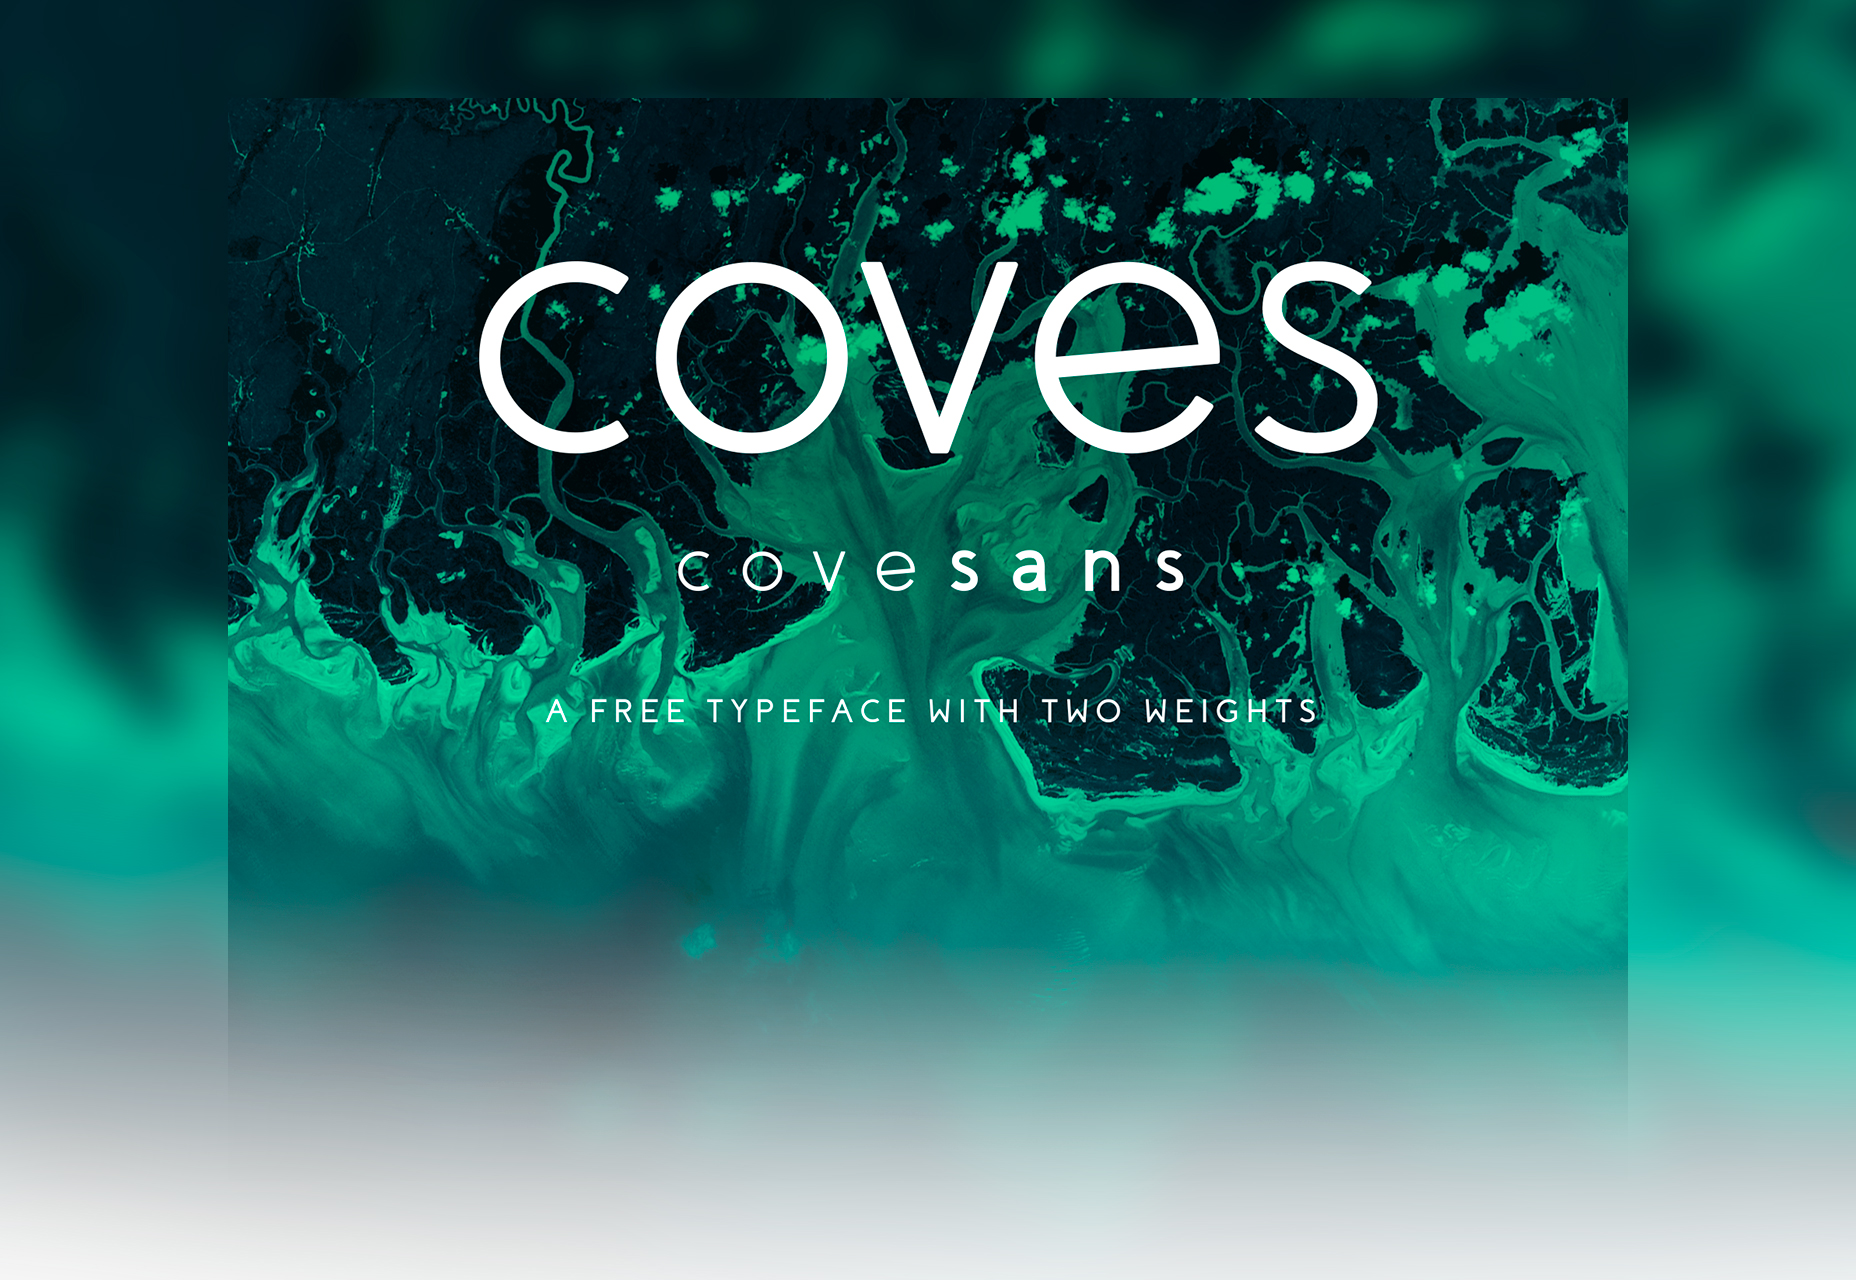 Coves: Rounded SansTypeface